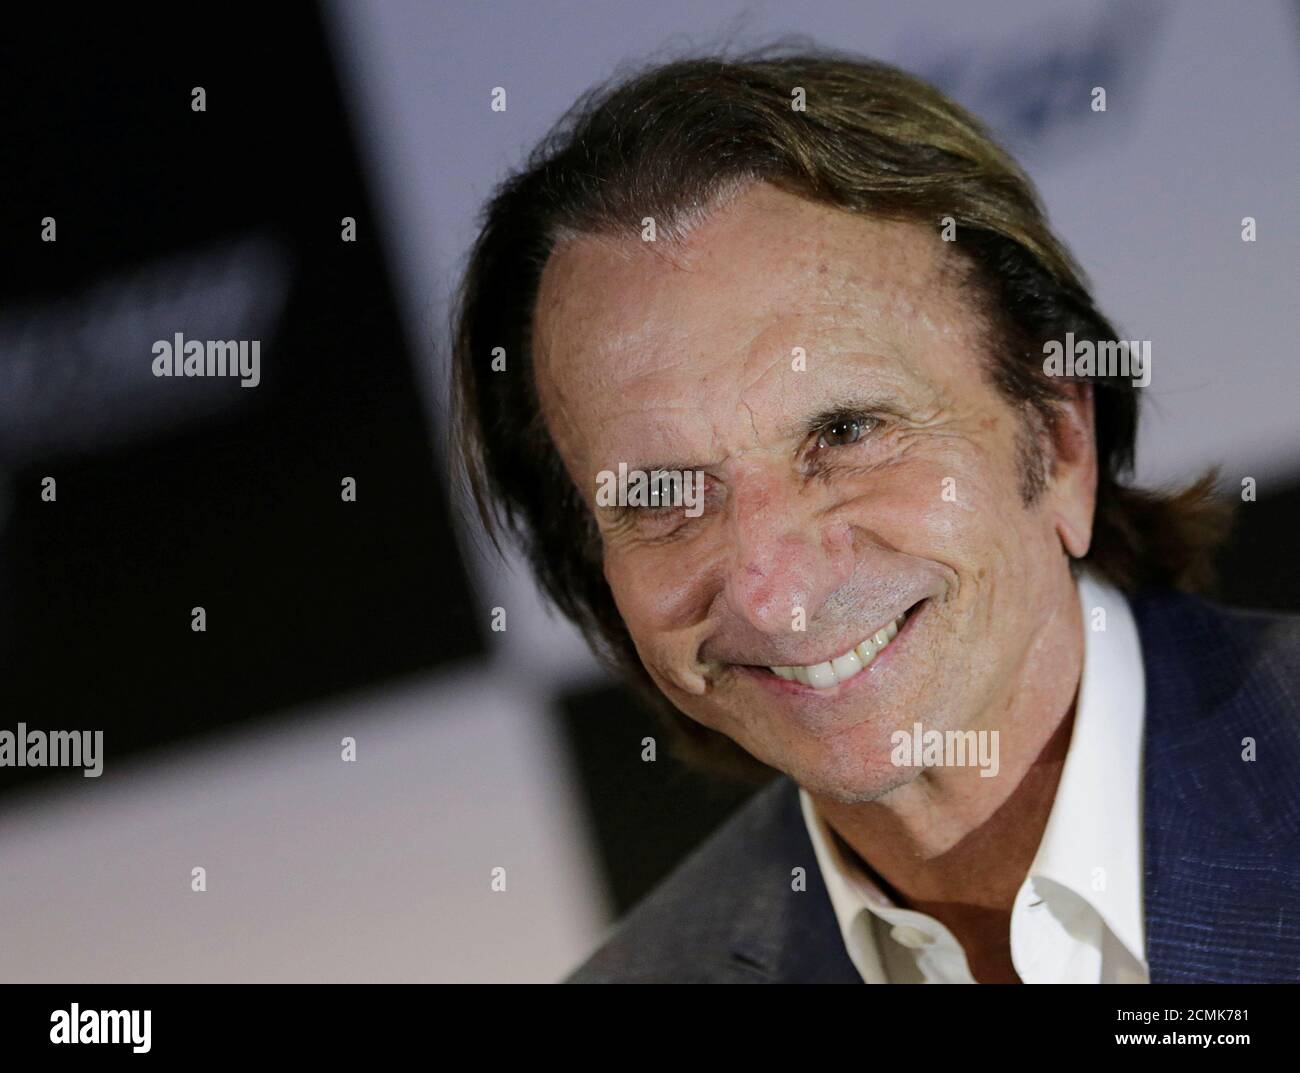 Former Brazilian Formula One driver Emerson Fittipaldi speaks to the media during a news conference about F1- FanZone in Mexico City, Mexico September 27, 2016. REUTERS/Henry Romero Stock Photo